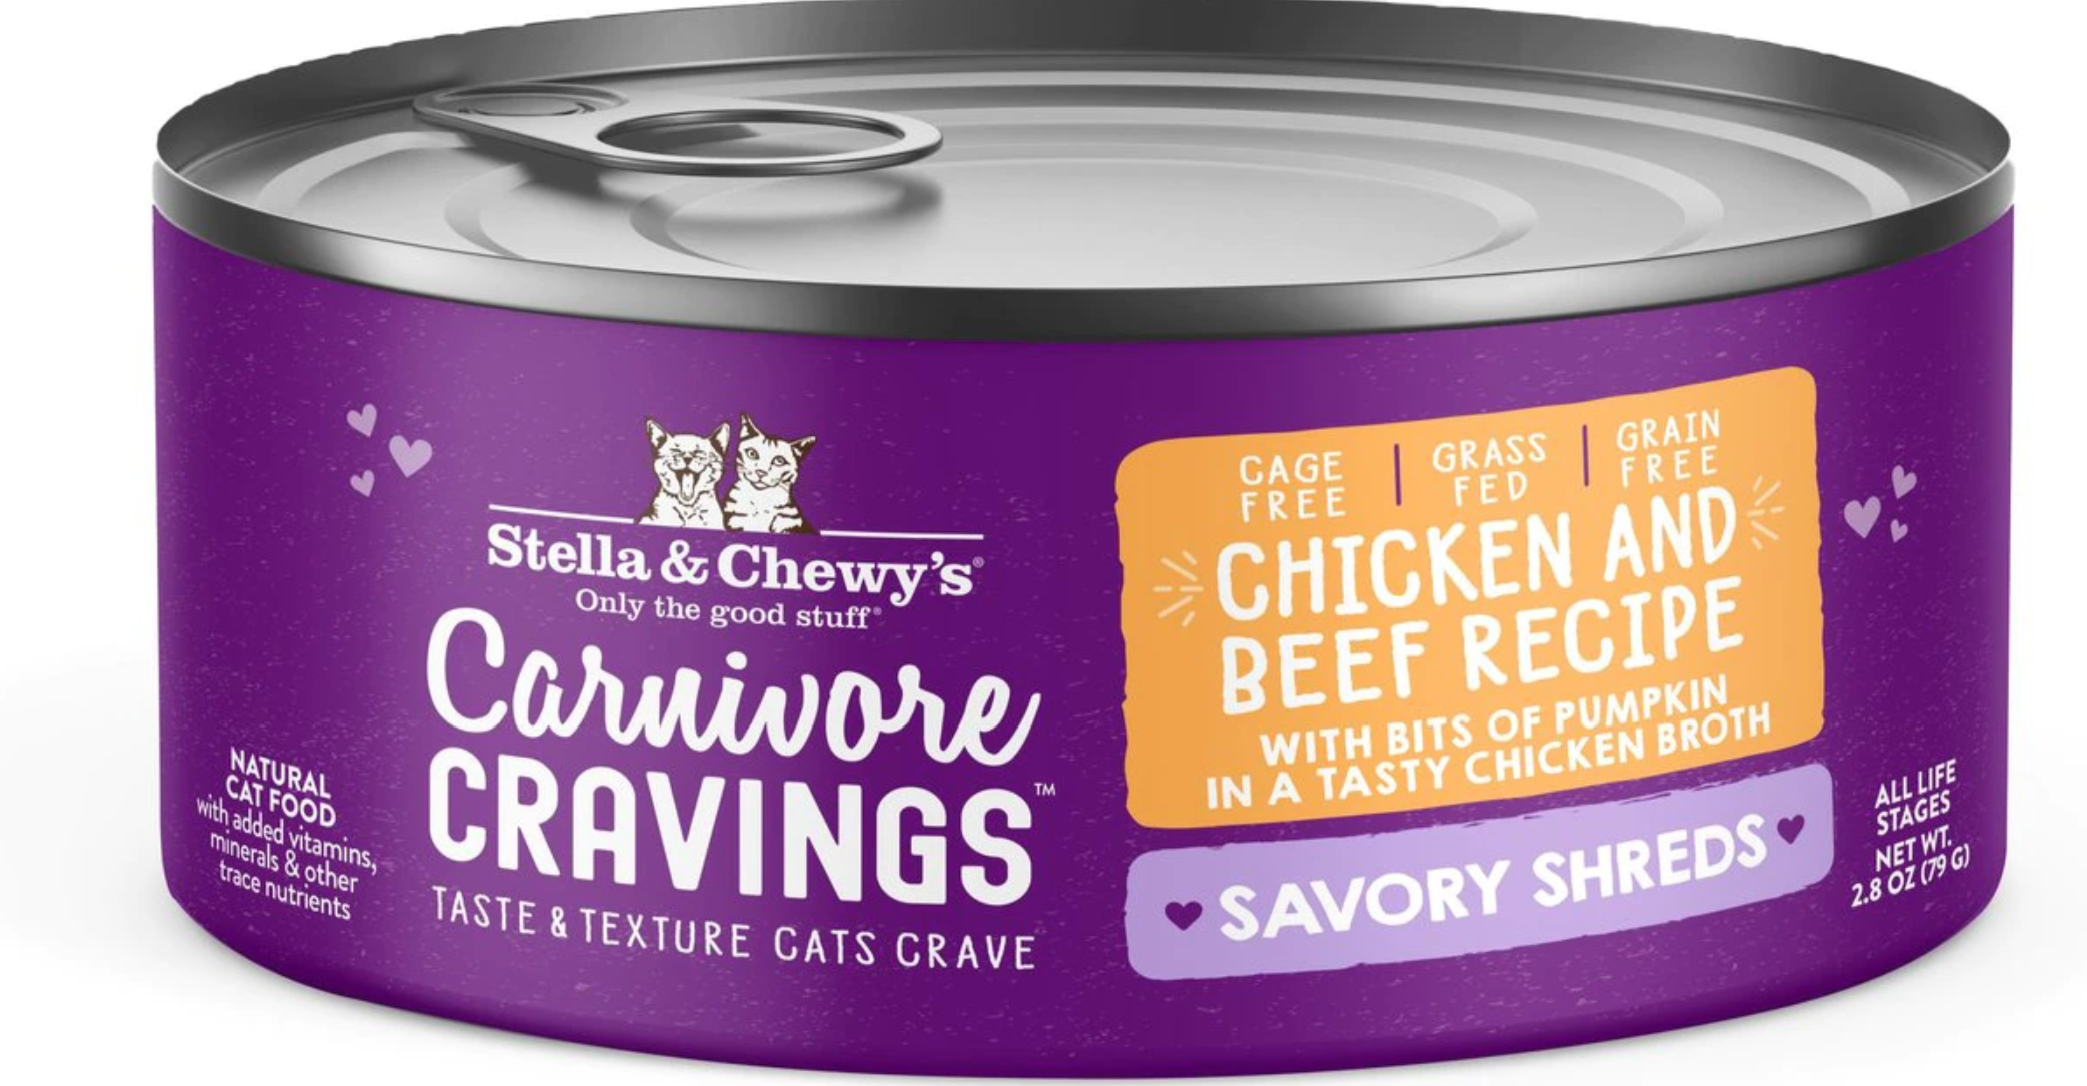 Stella & Chewy's Carnivore Cravings Savory Shreds Chicken & Beef Recipe - 2.8oz Can